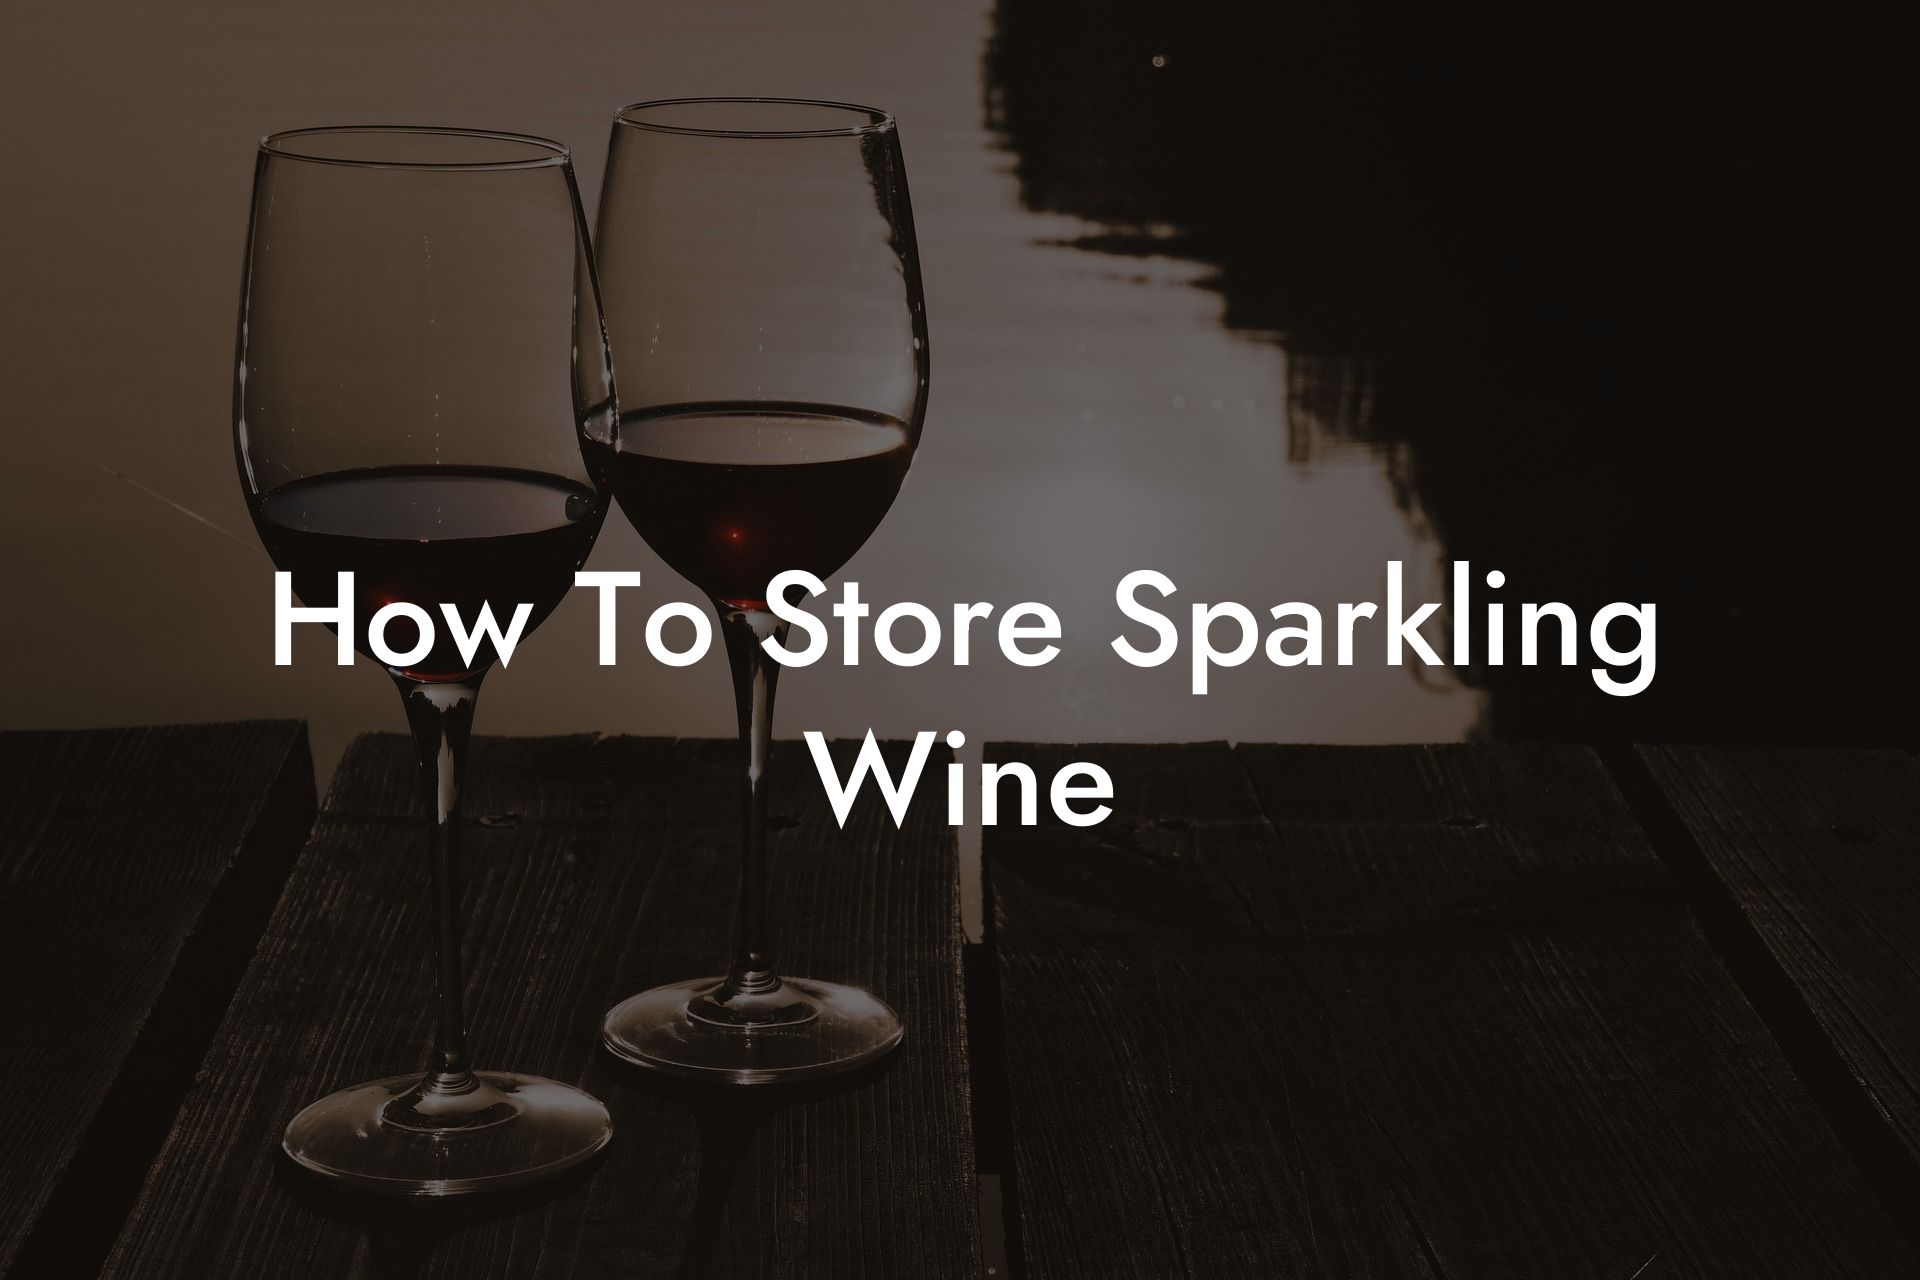 How To Store Sparkling Wine